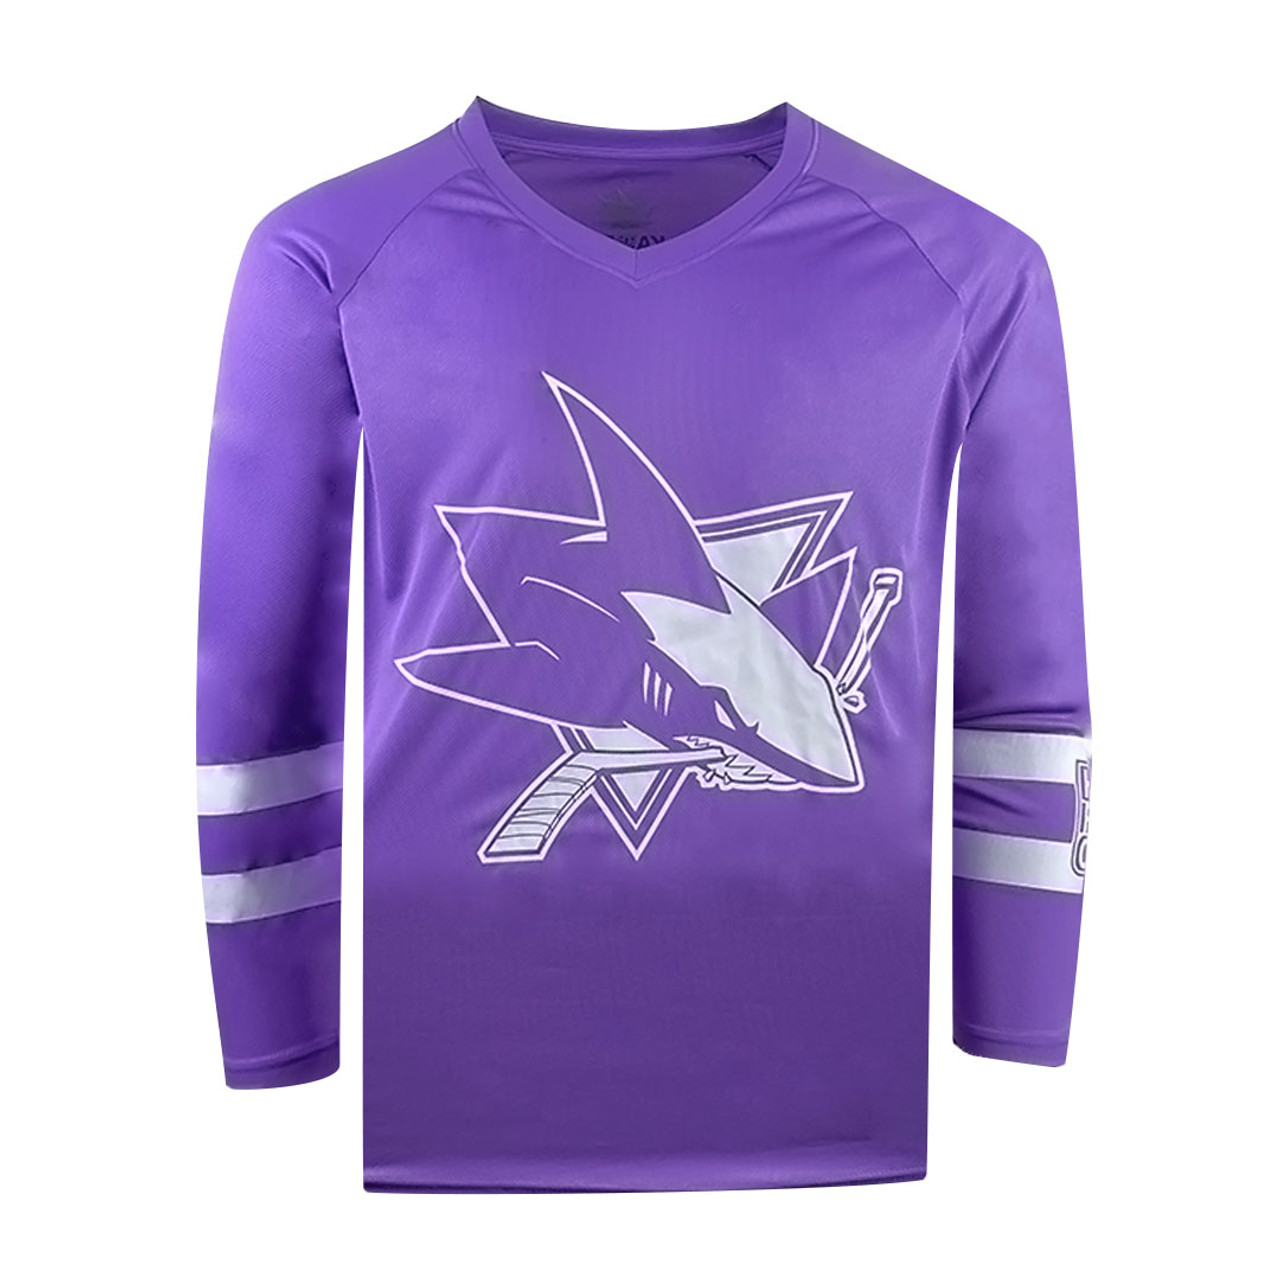 Authentic Adidas San Jose Sharks Hockey Fights Cancer Jersey